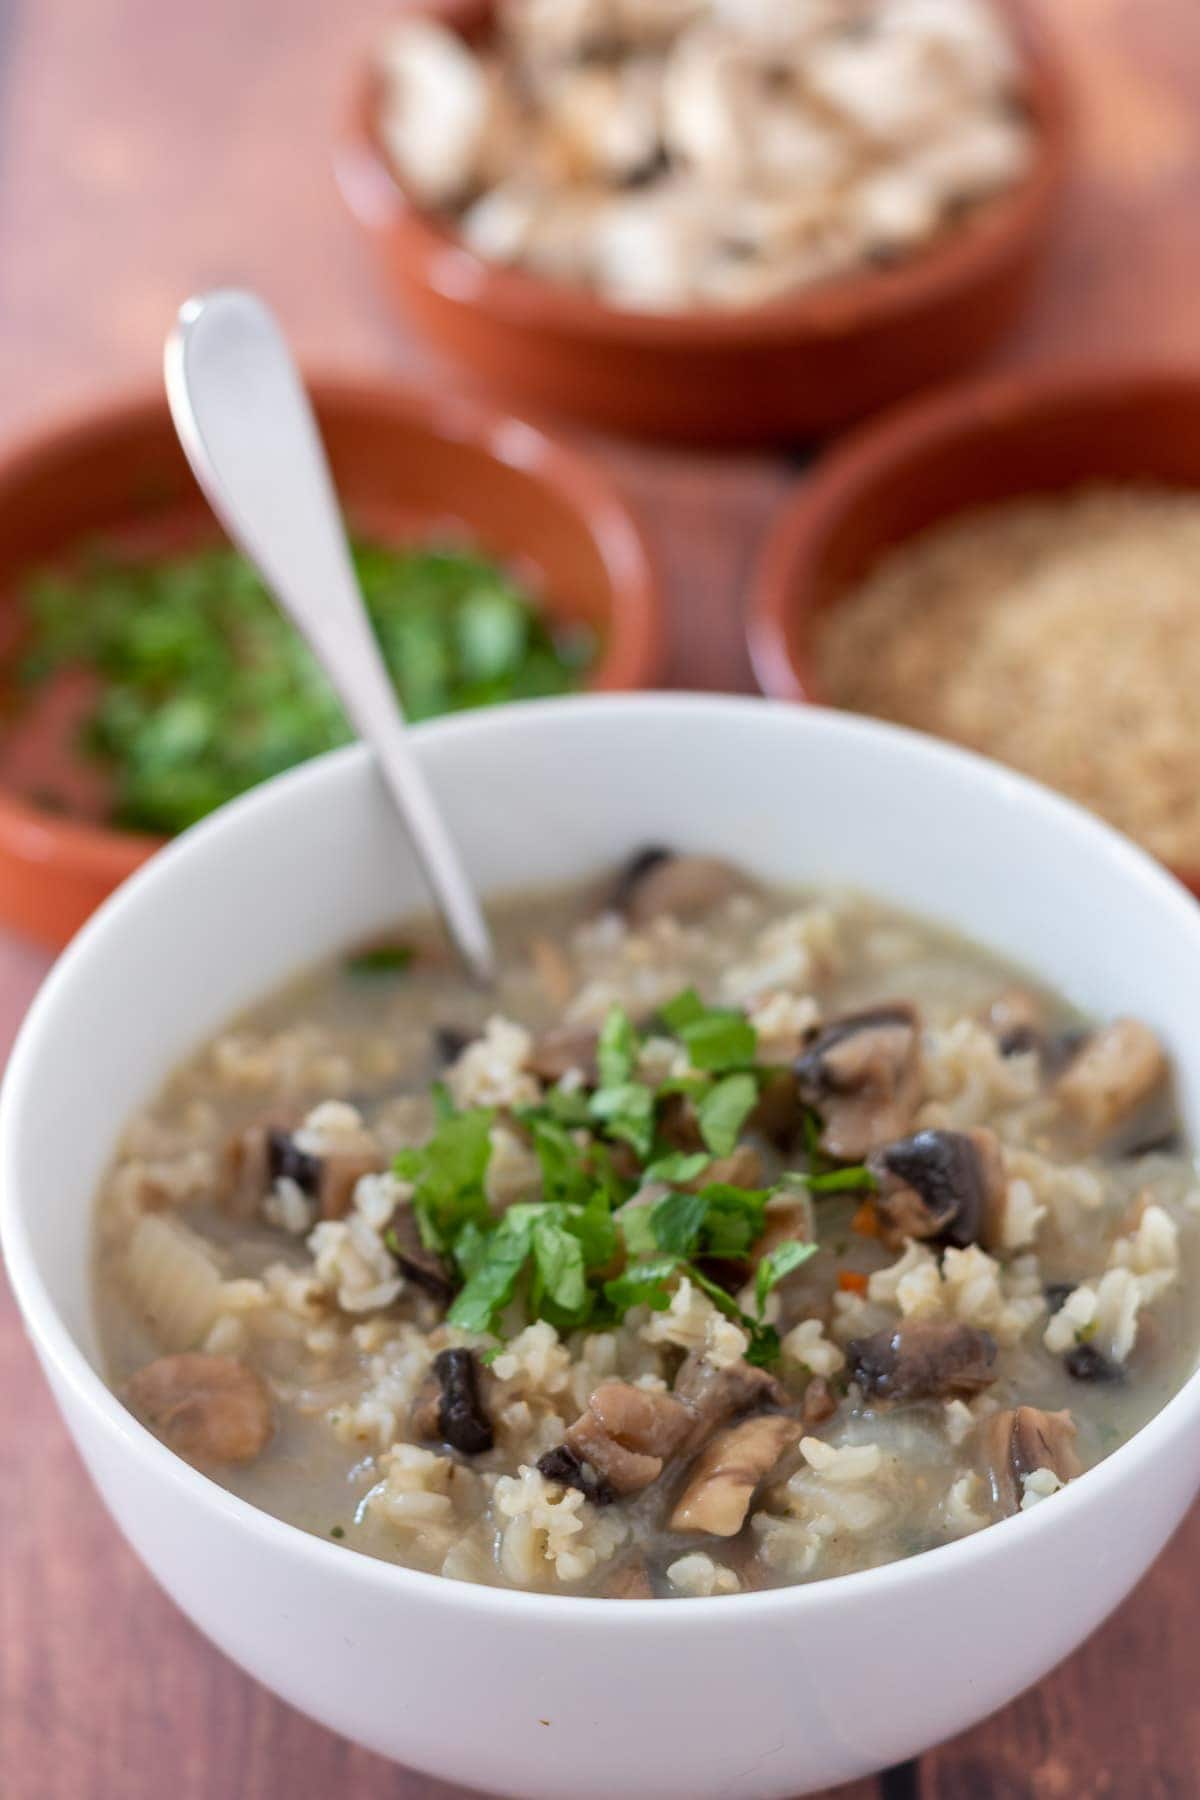 A bowl of mushroom and rice soup with a soup spoon in. Small dishes of chopped parsley, brown rice and chopped mushrooms in the background.